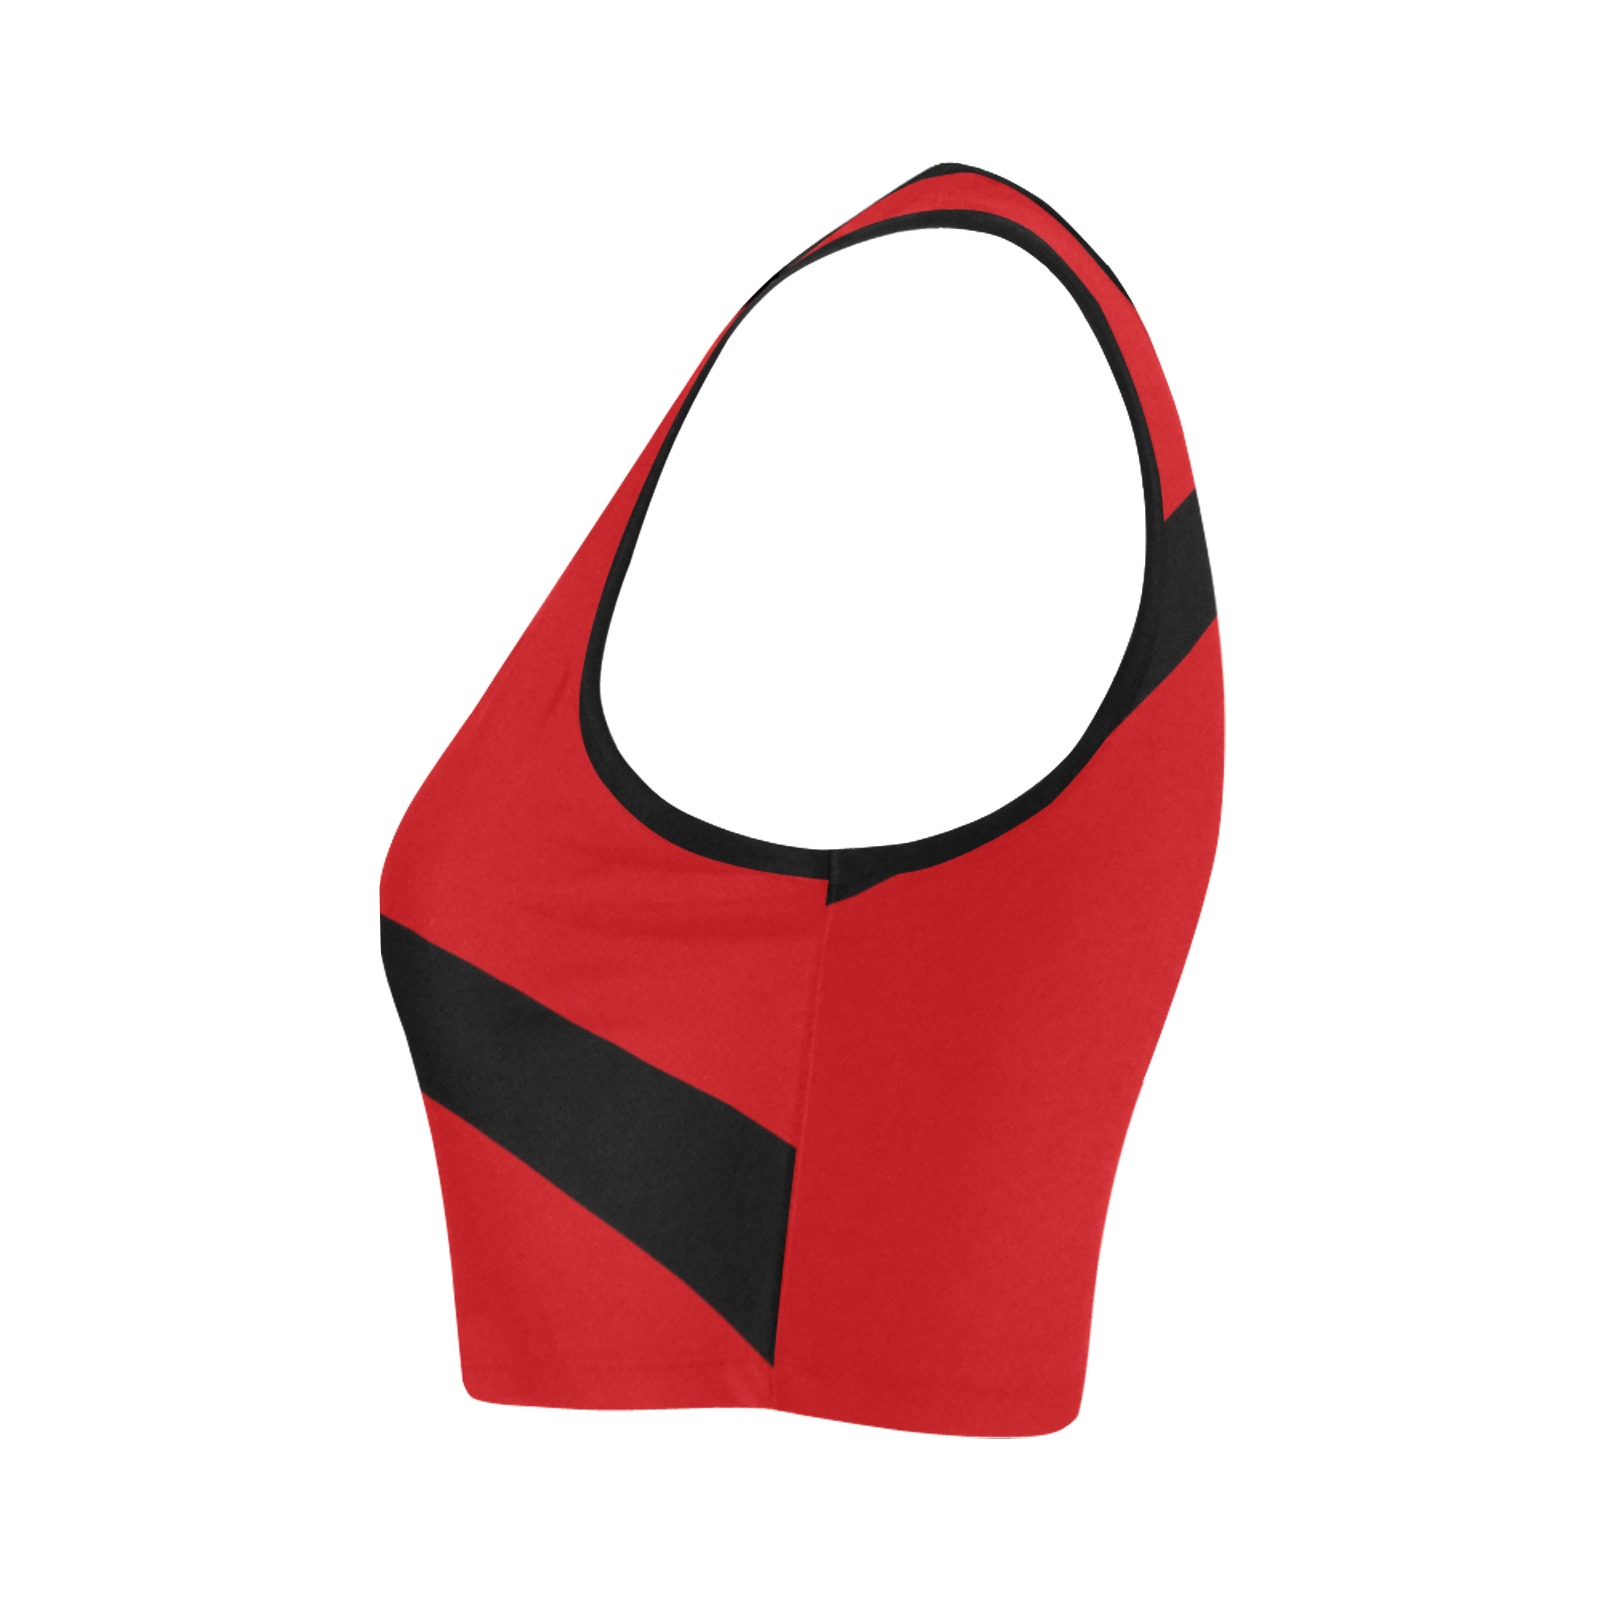 Sexy Red and Black Women's Crop Top (Model T42)